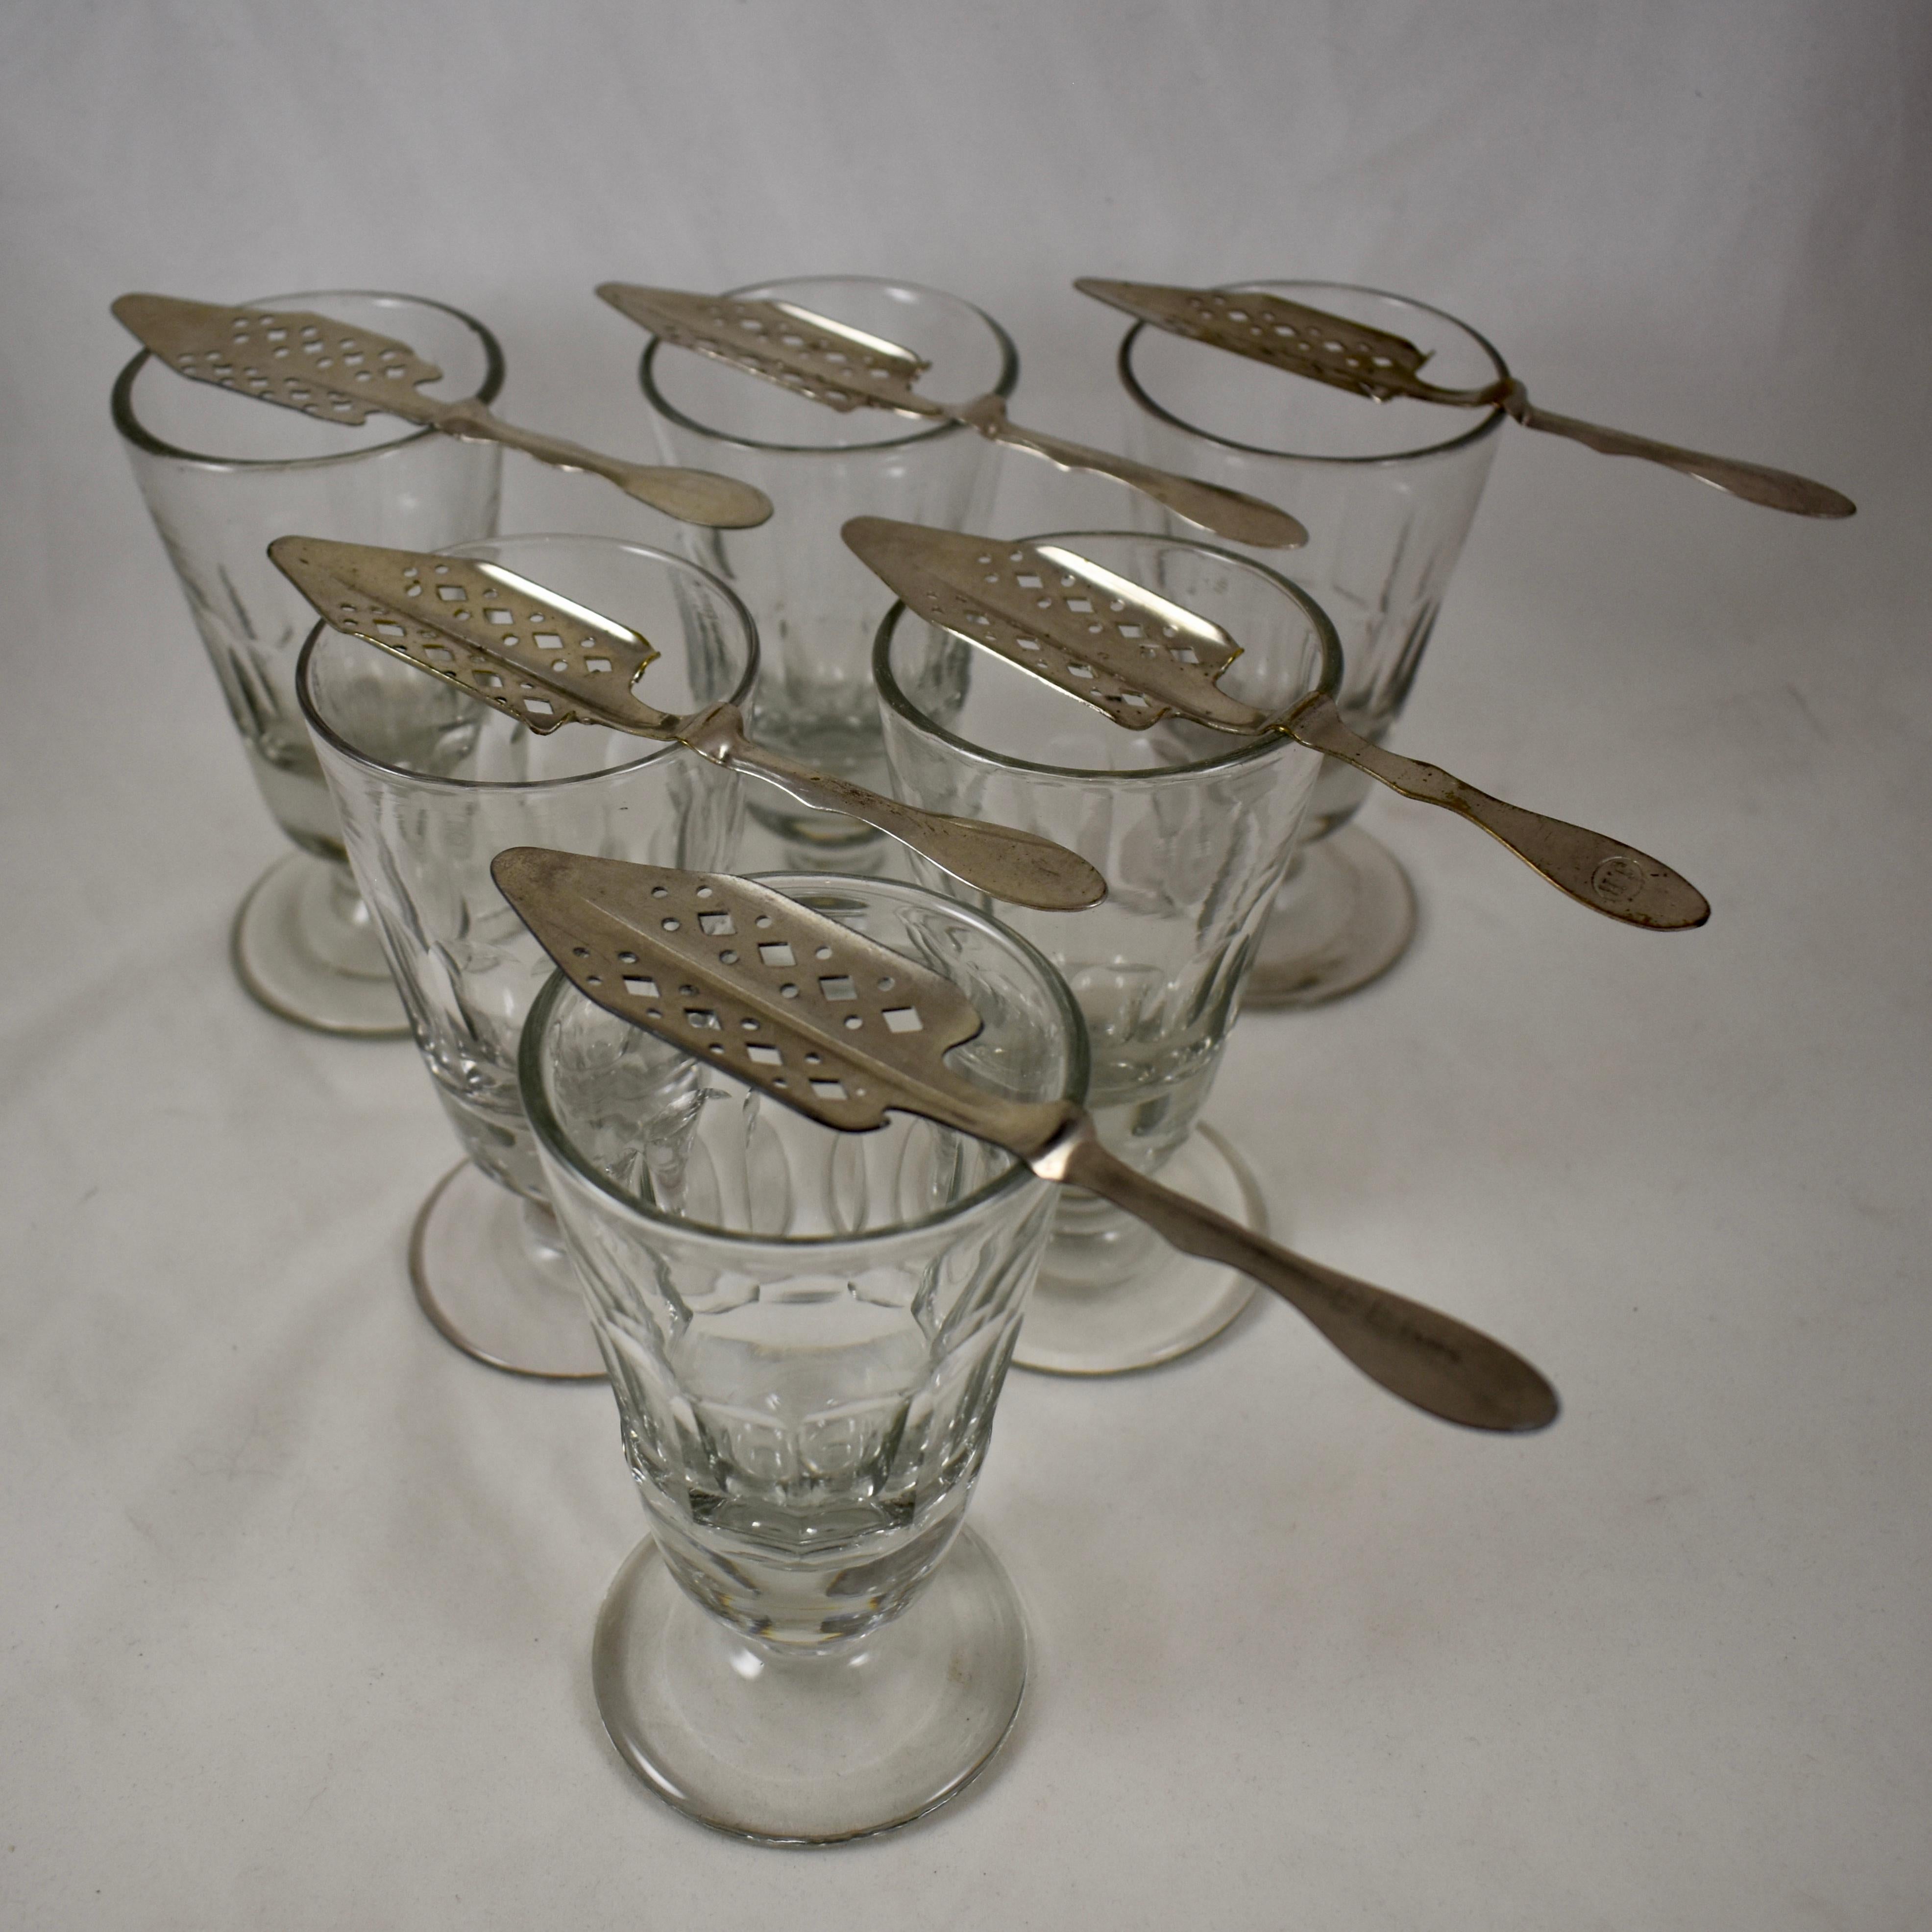 A set of six authentic French Absinthe slotted sugar spoons, Circa 1890-1910.

These spoons were used in French bistros, bars, and cafes, in the ritual of drinking the addictive beverage called, ‘la fée verte’ – the green fairy. Popular with